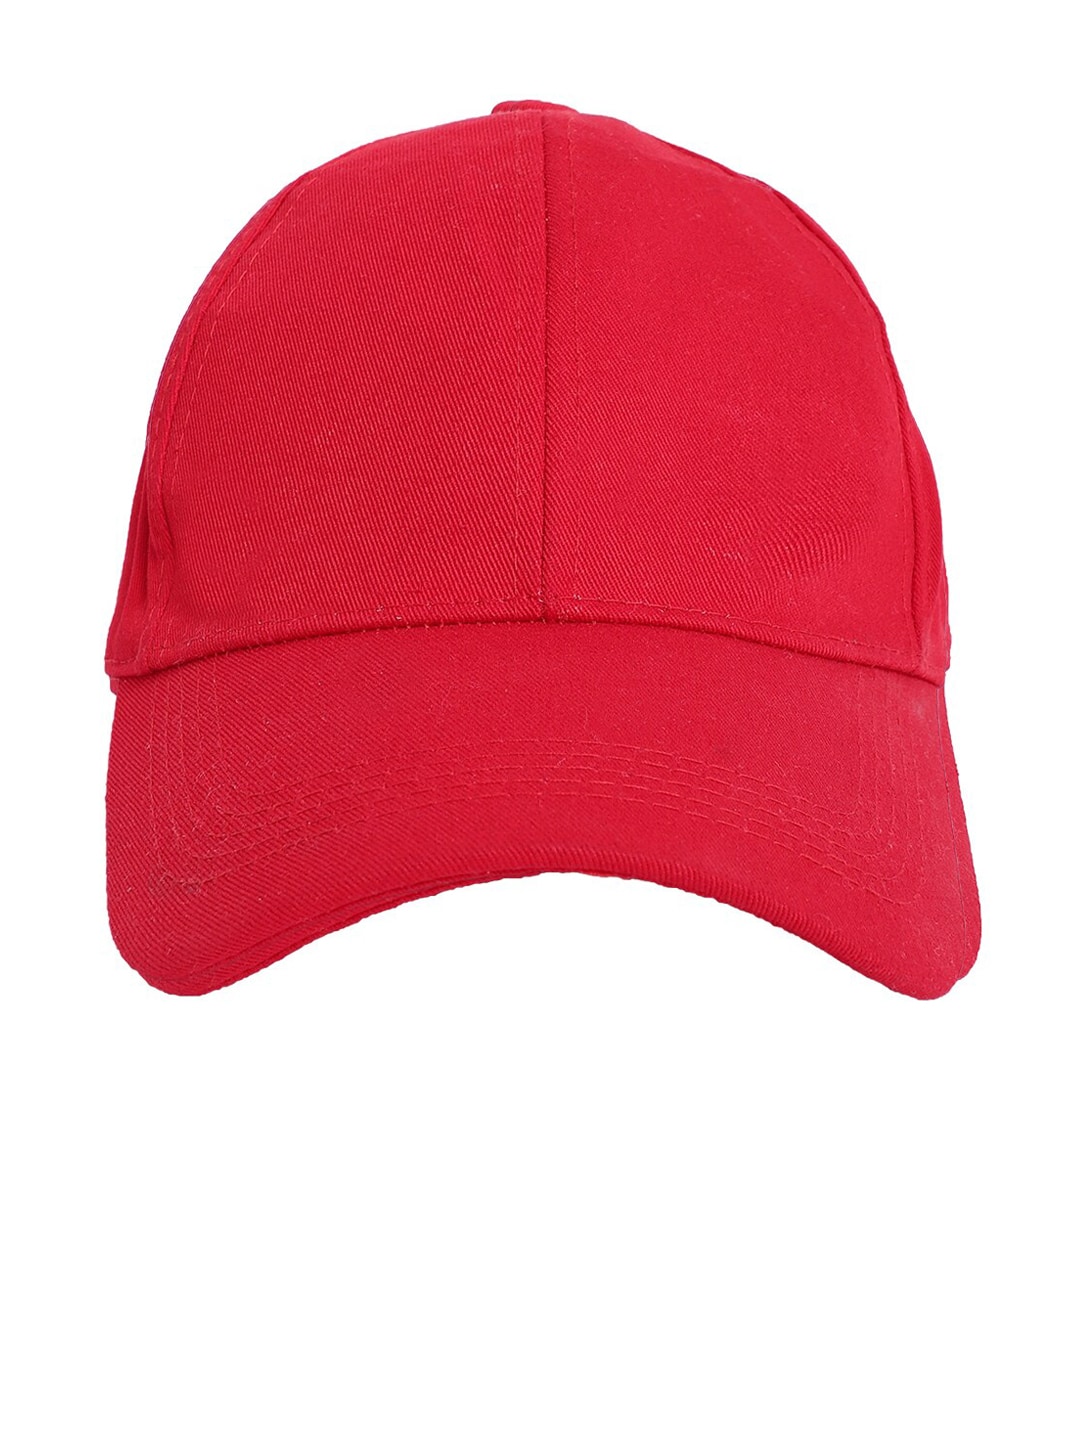 QUIRKY Unisex Red Solid Baseball Cap Price in India